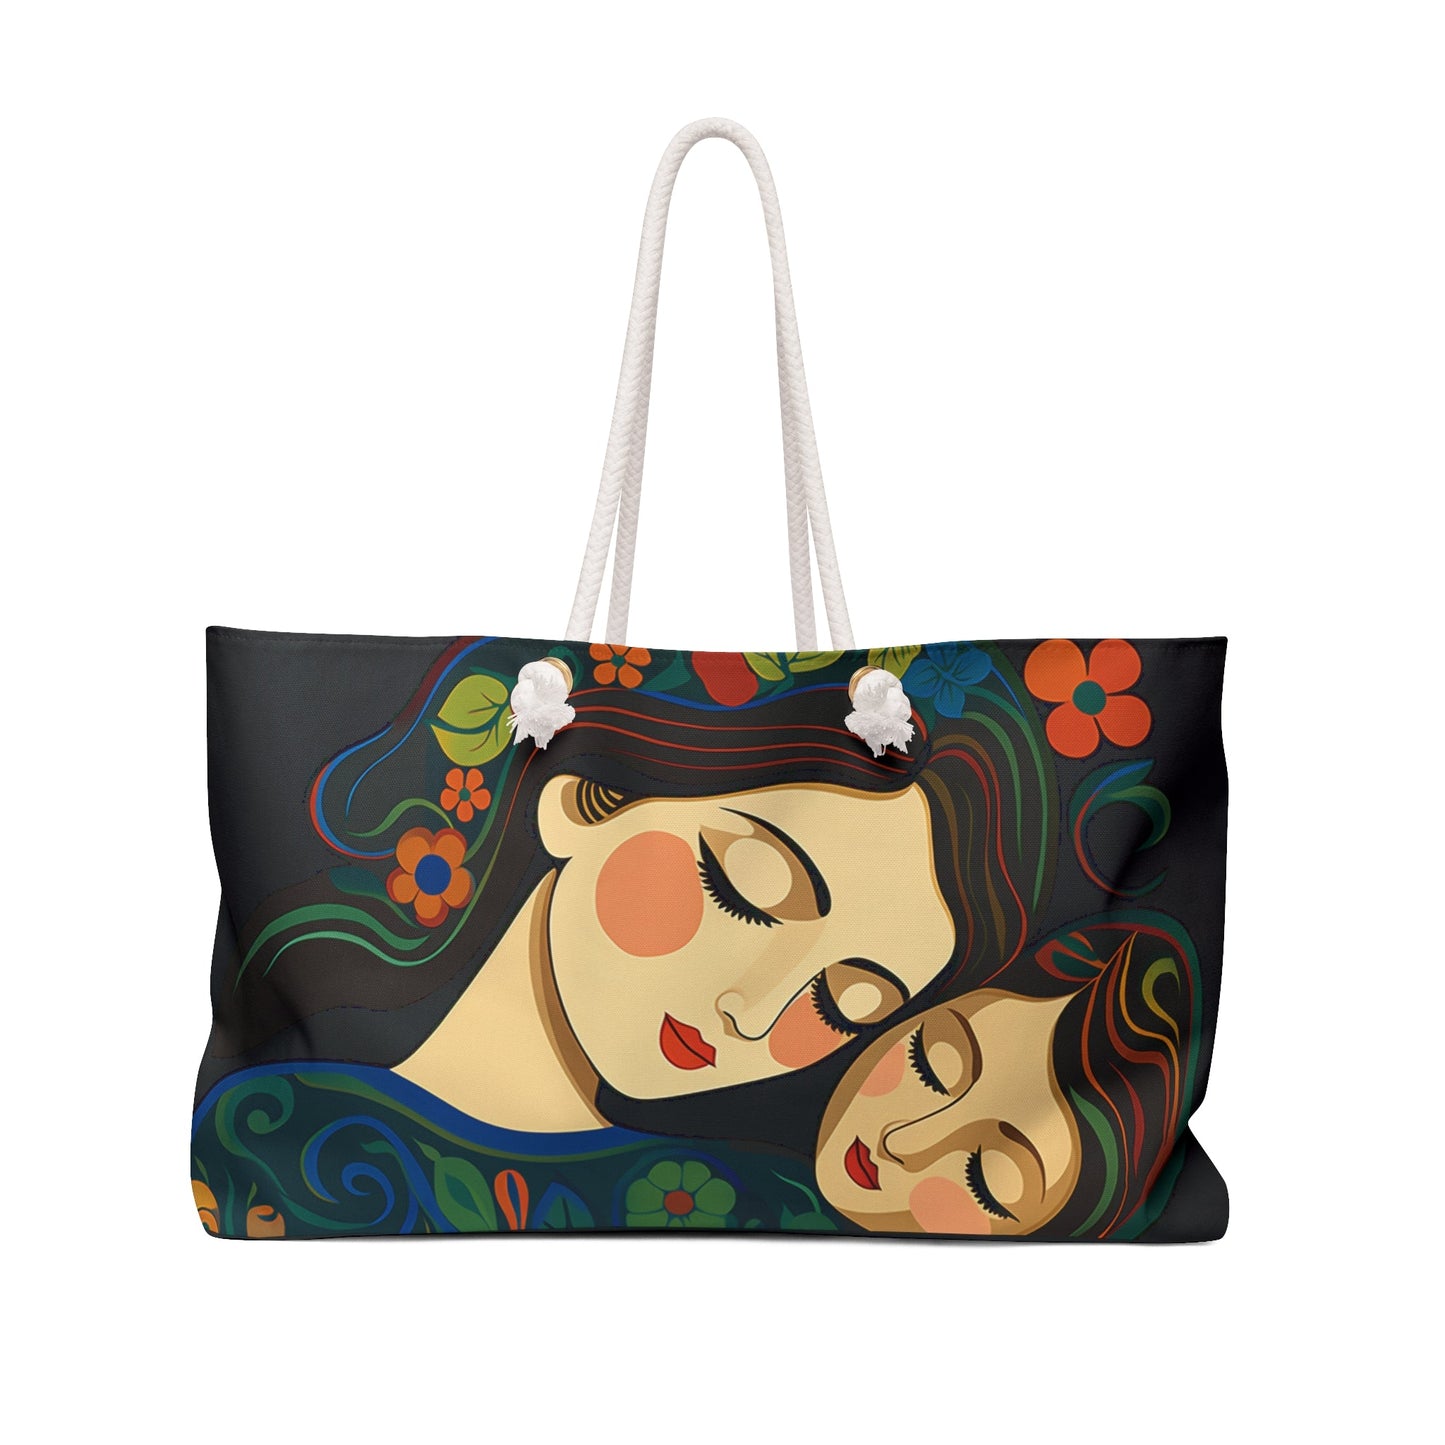 Mother Weekender Tote, Mom and Child in a Madonna Pose, Stylized Illustration, Unique Art Work - FlooredByArt